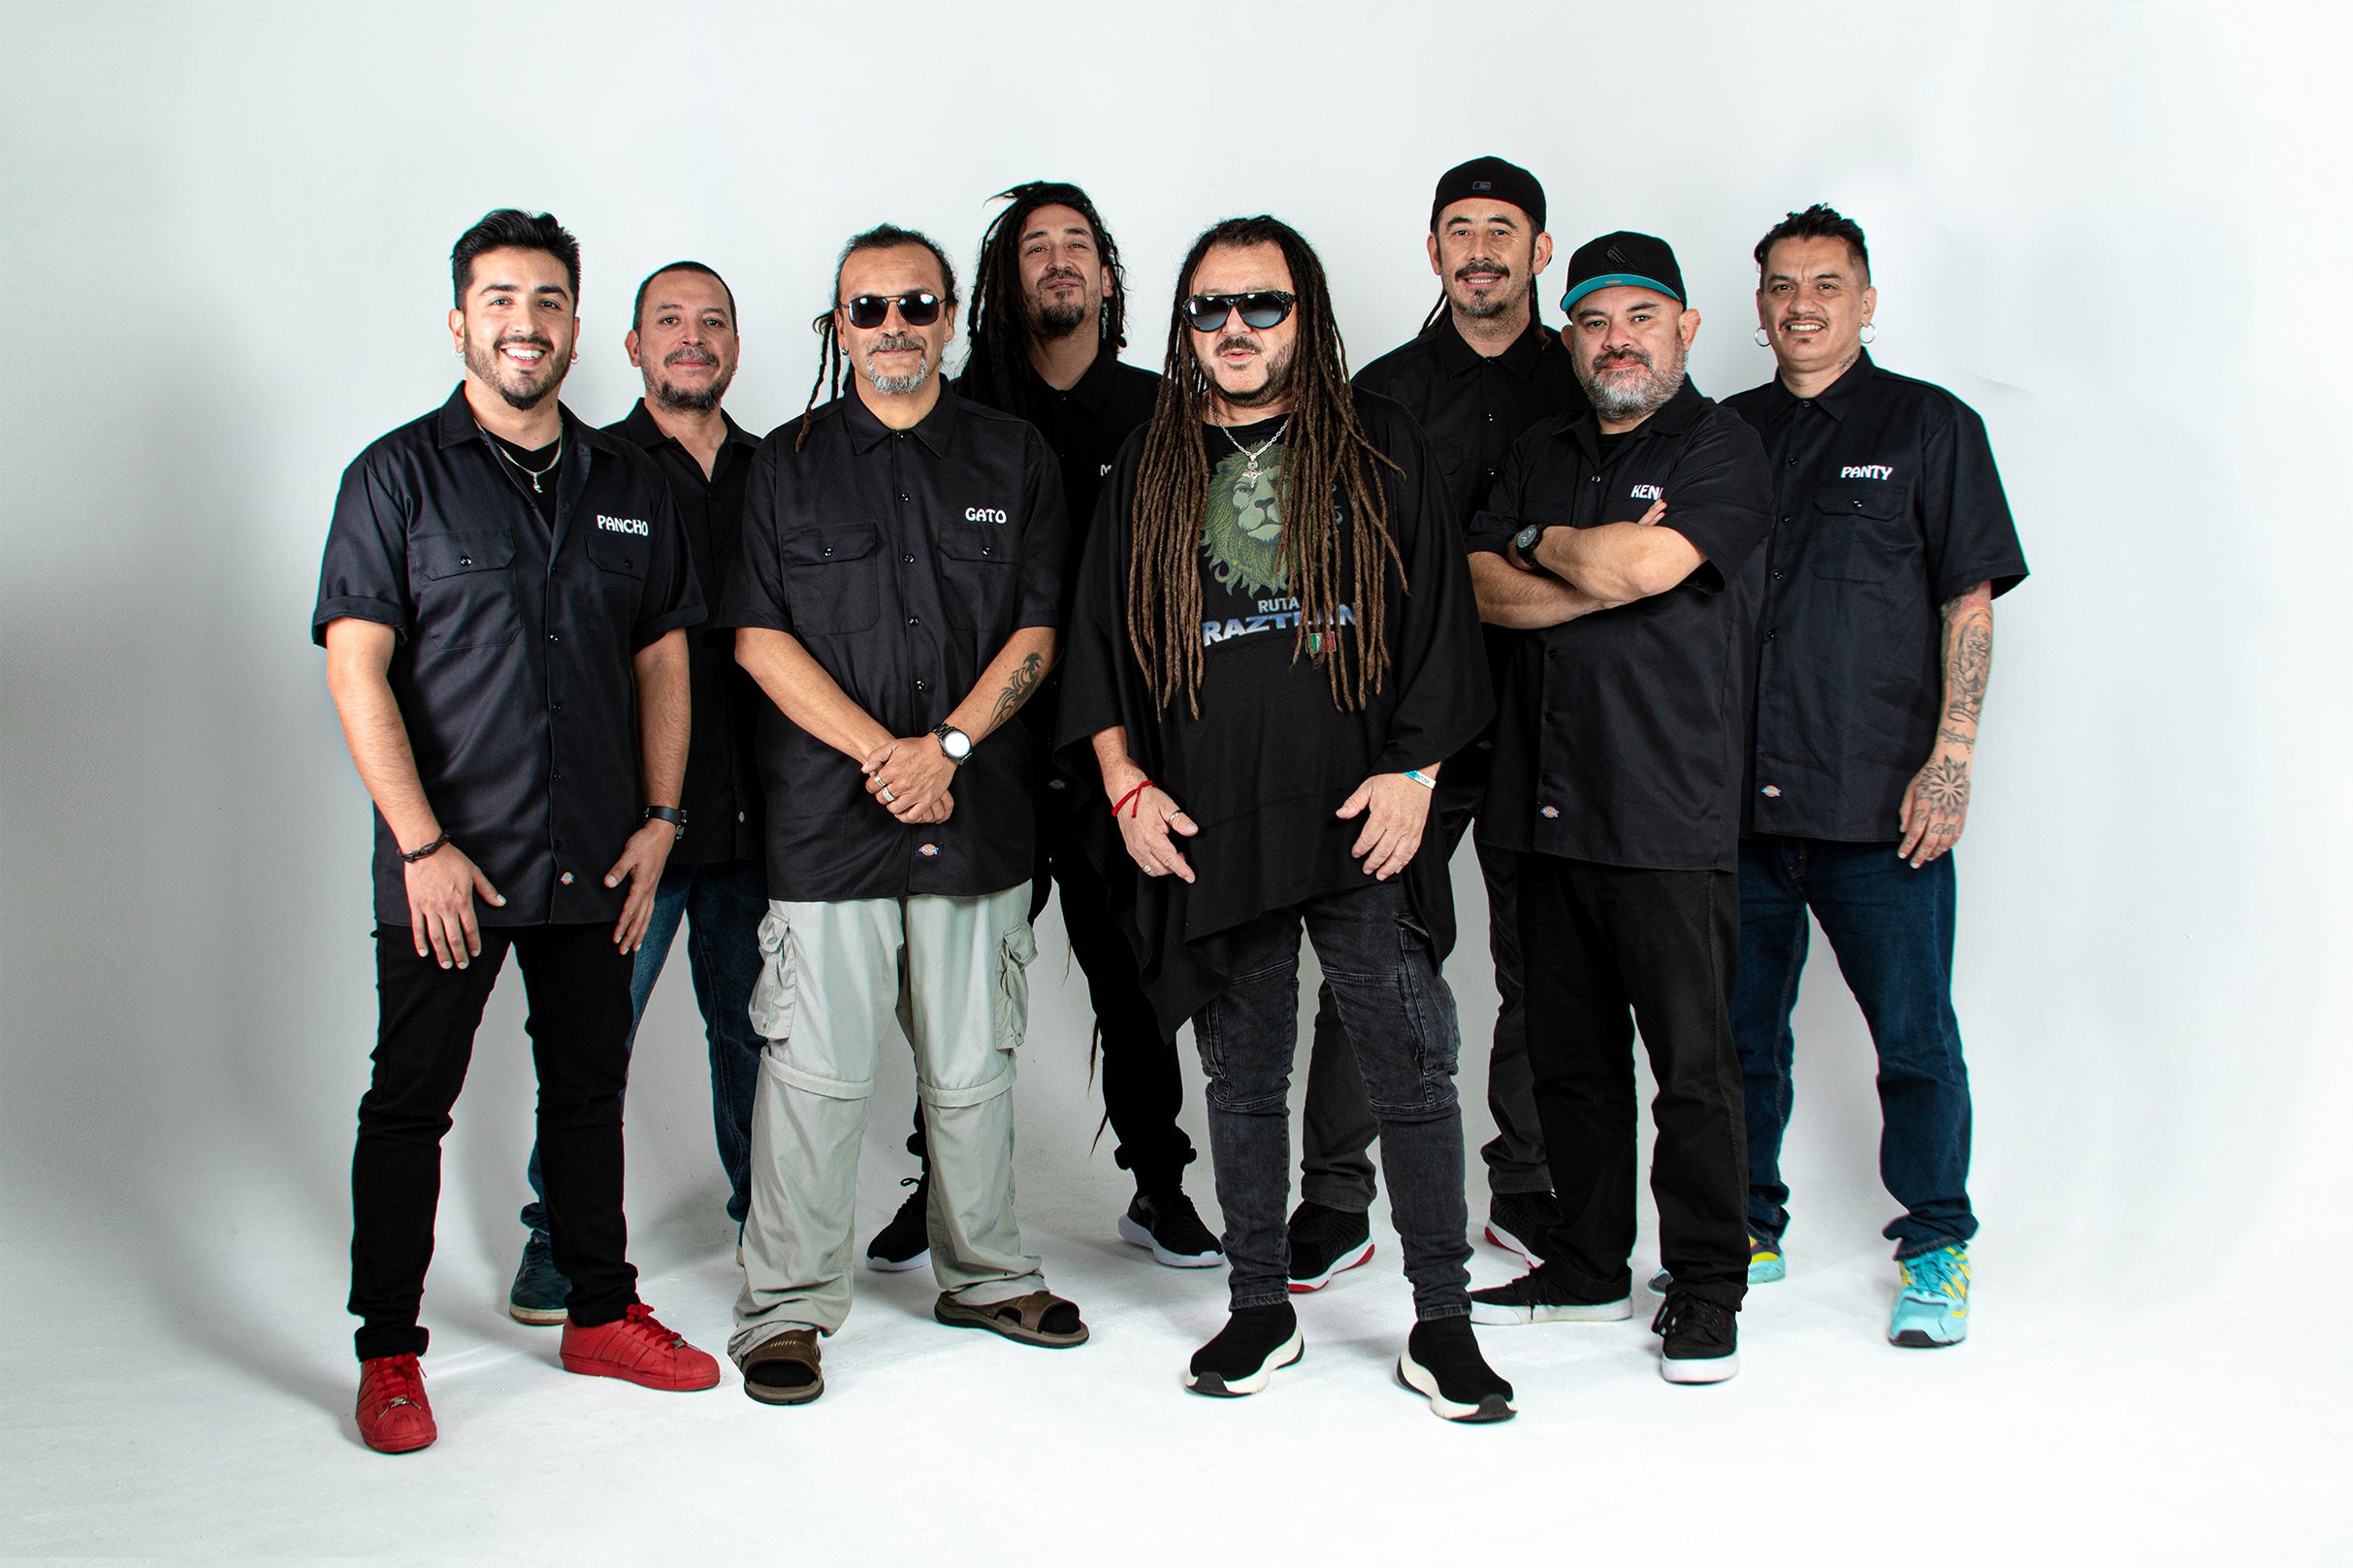 Gondwana free pre-sale password for early tickets in Los Angeles